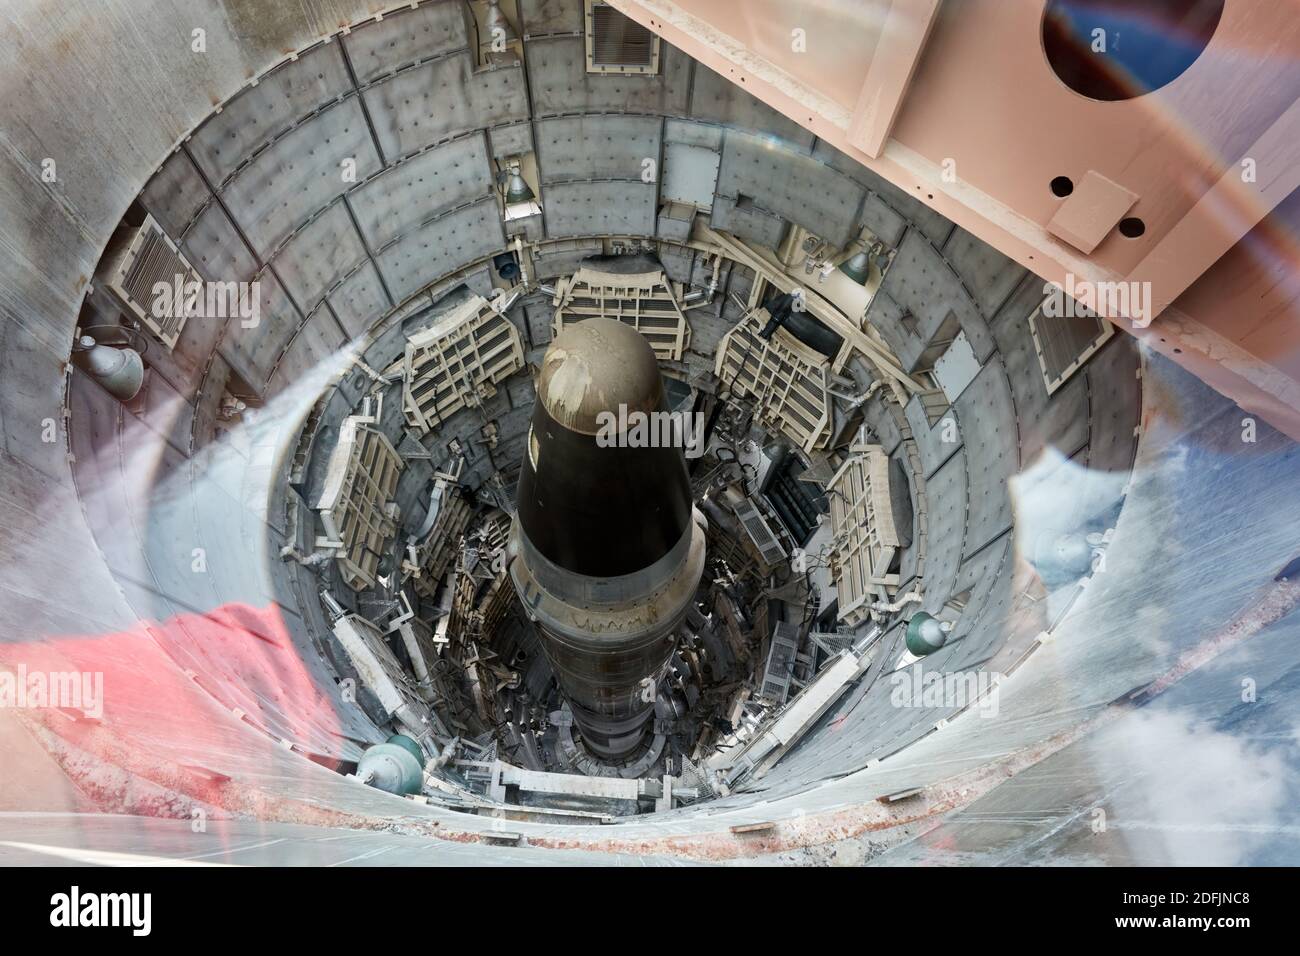 Titan nuclear missile seen from the top of the silo at the Titan Missile Museum, Tucson, Arizona Stock Photo